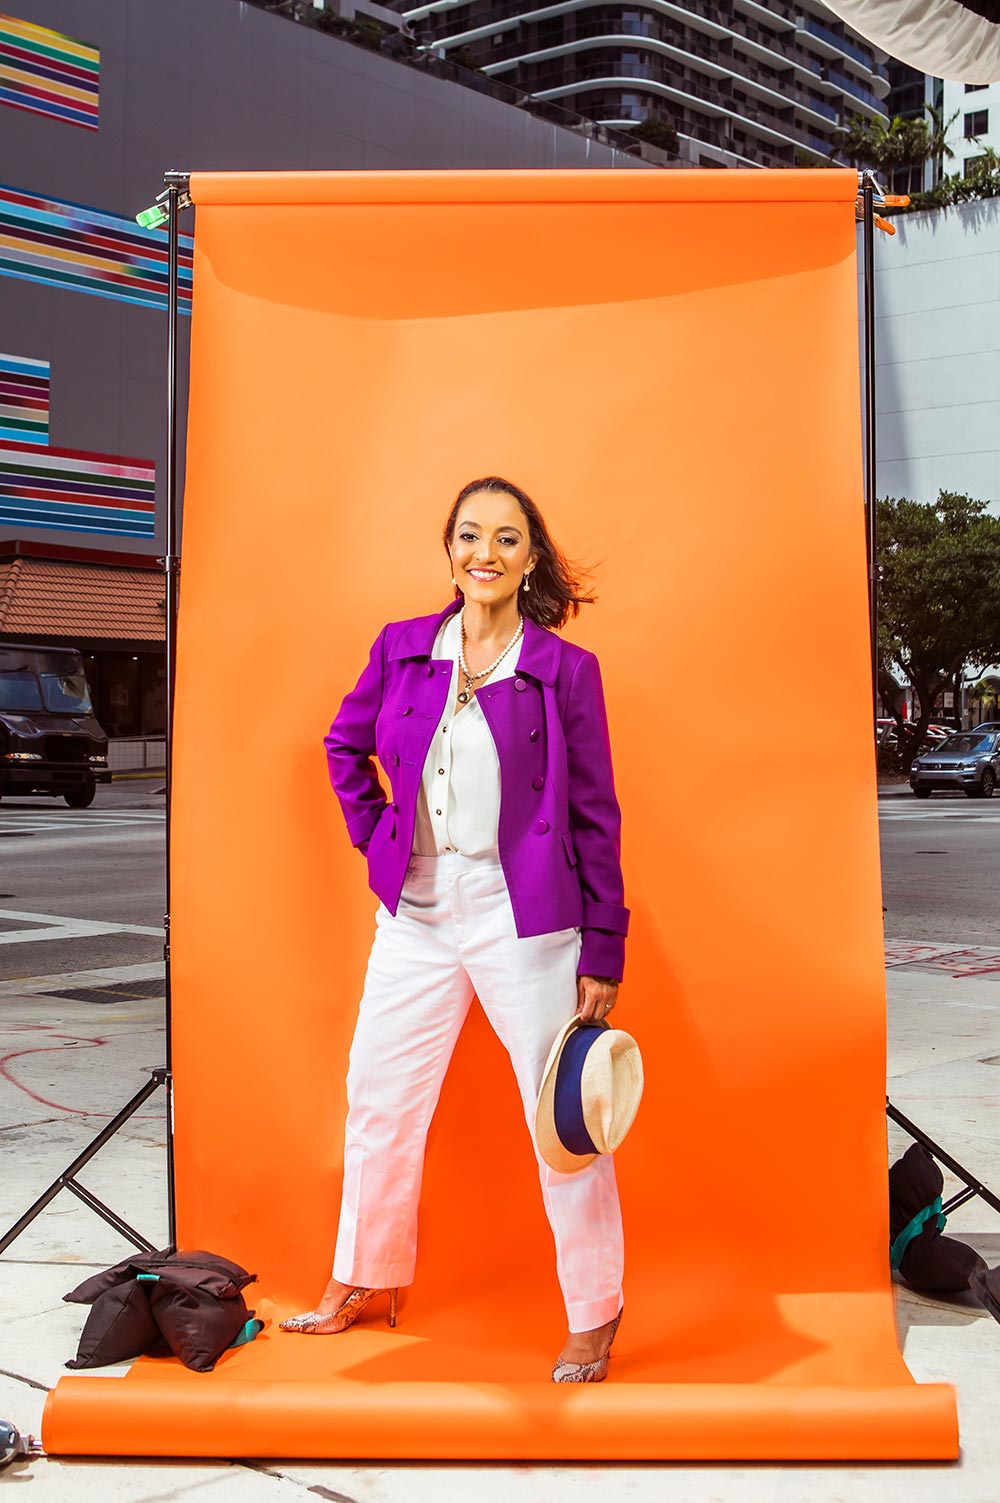 Grissel Seijo in a purple suit jacket and white pants, standing in front of a bright orange photoshoot screen